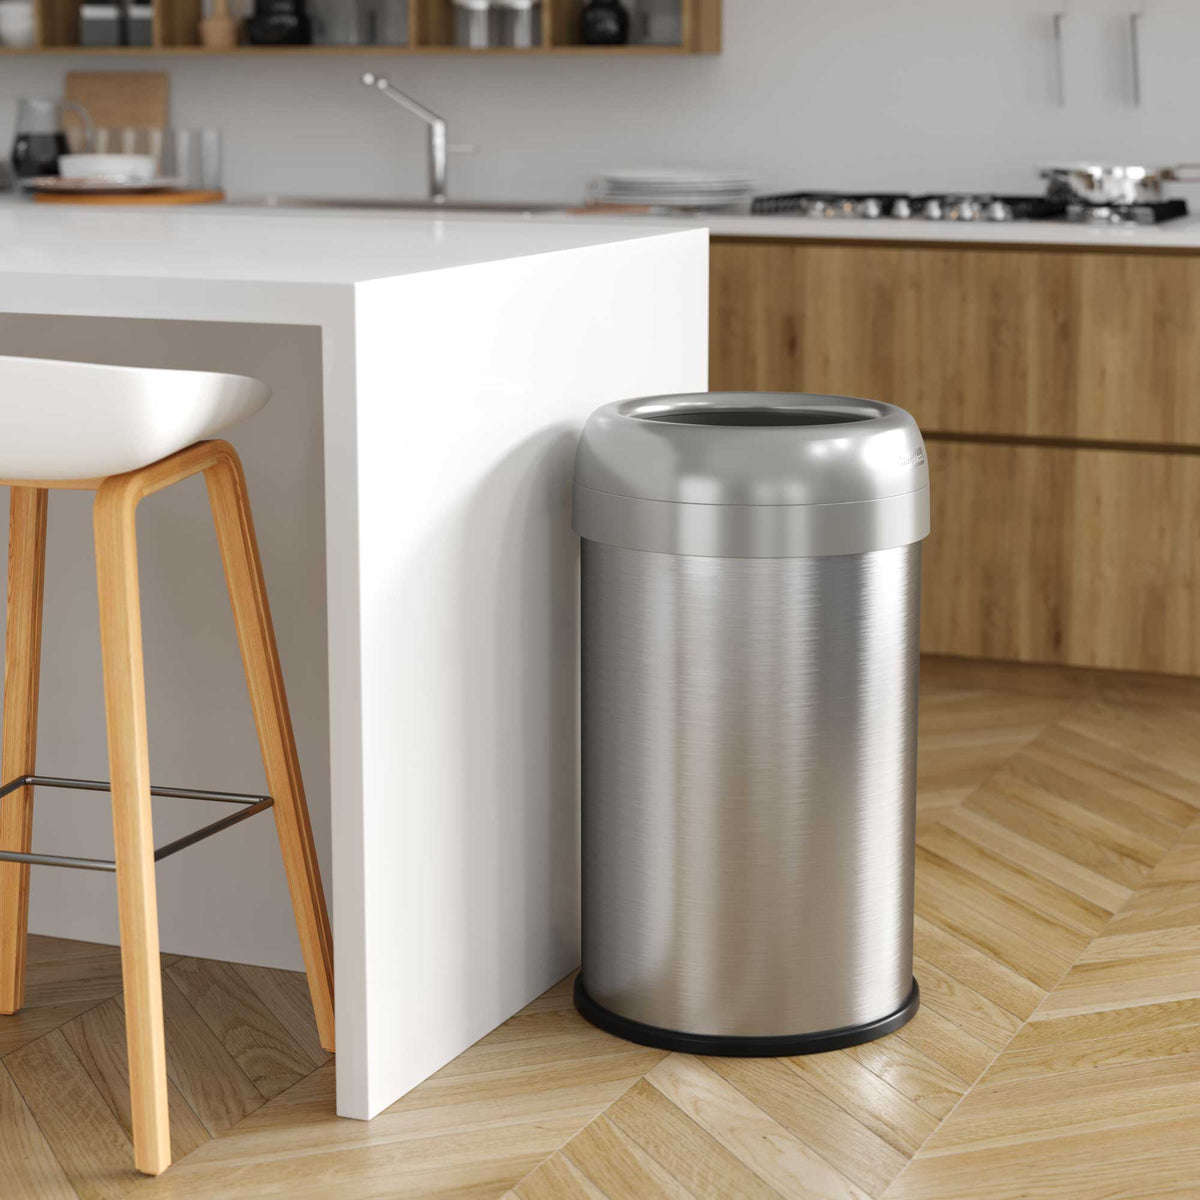 13 Gallon Round Open Top Trash Can with Wheels in kitchen